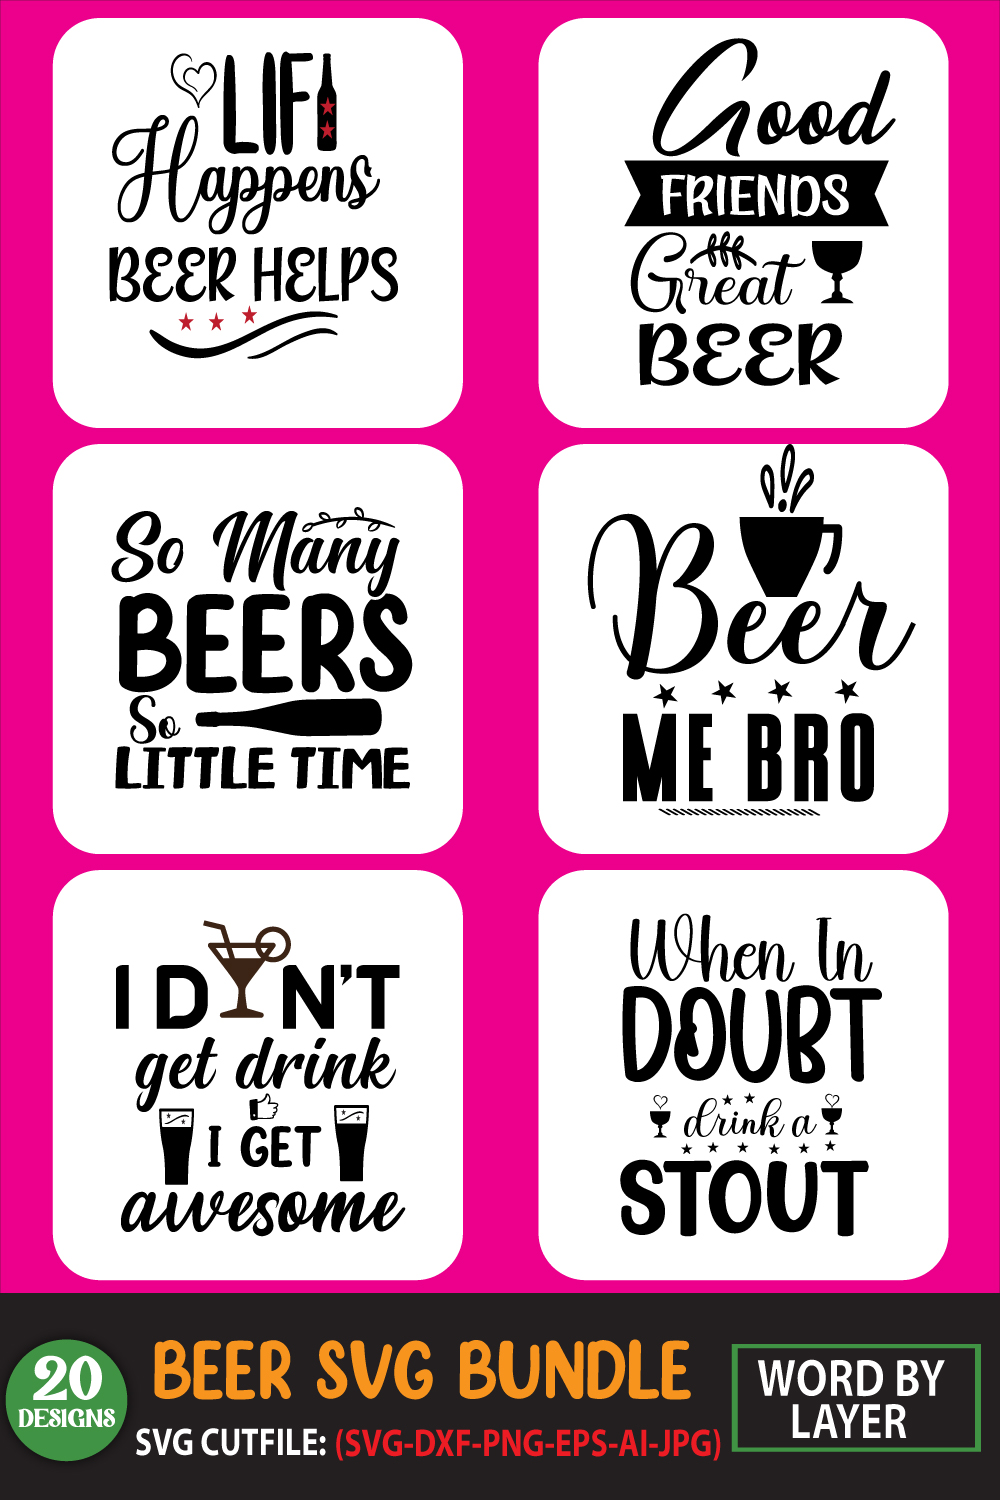 Collection of exquisite images for prints on the theme of beer